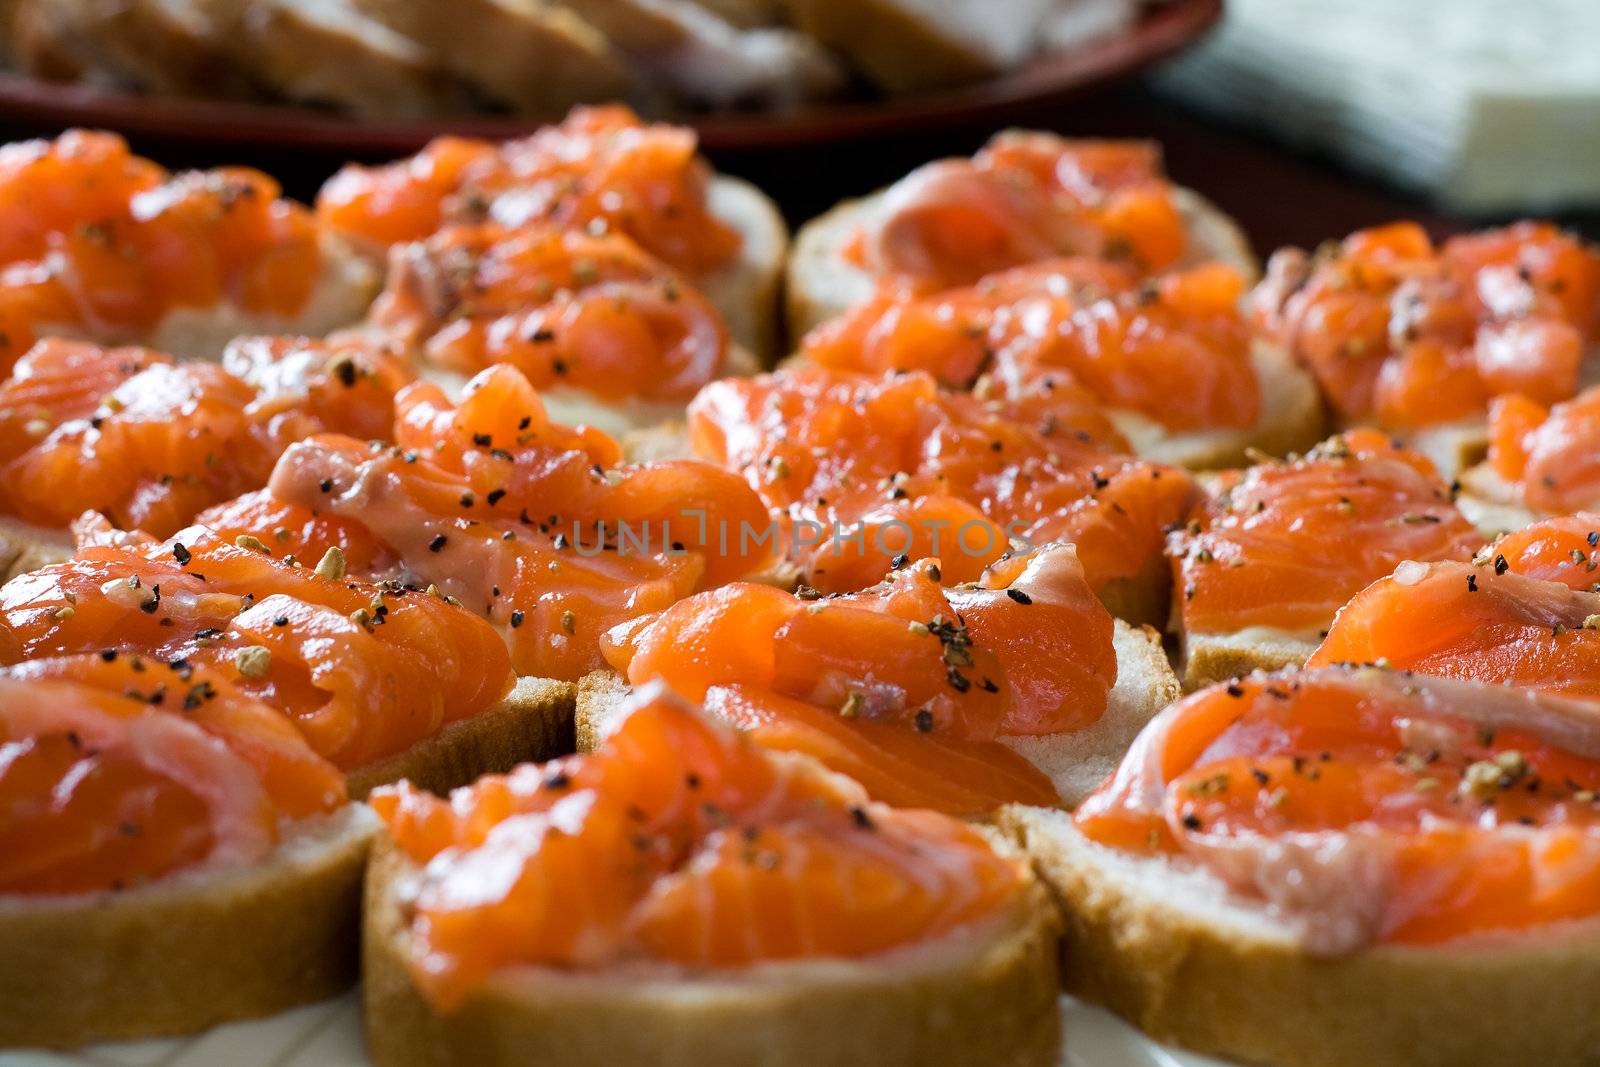 Sandwiches with smoked salmon by ints